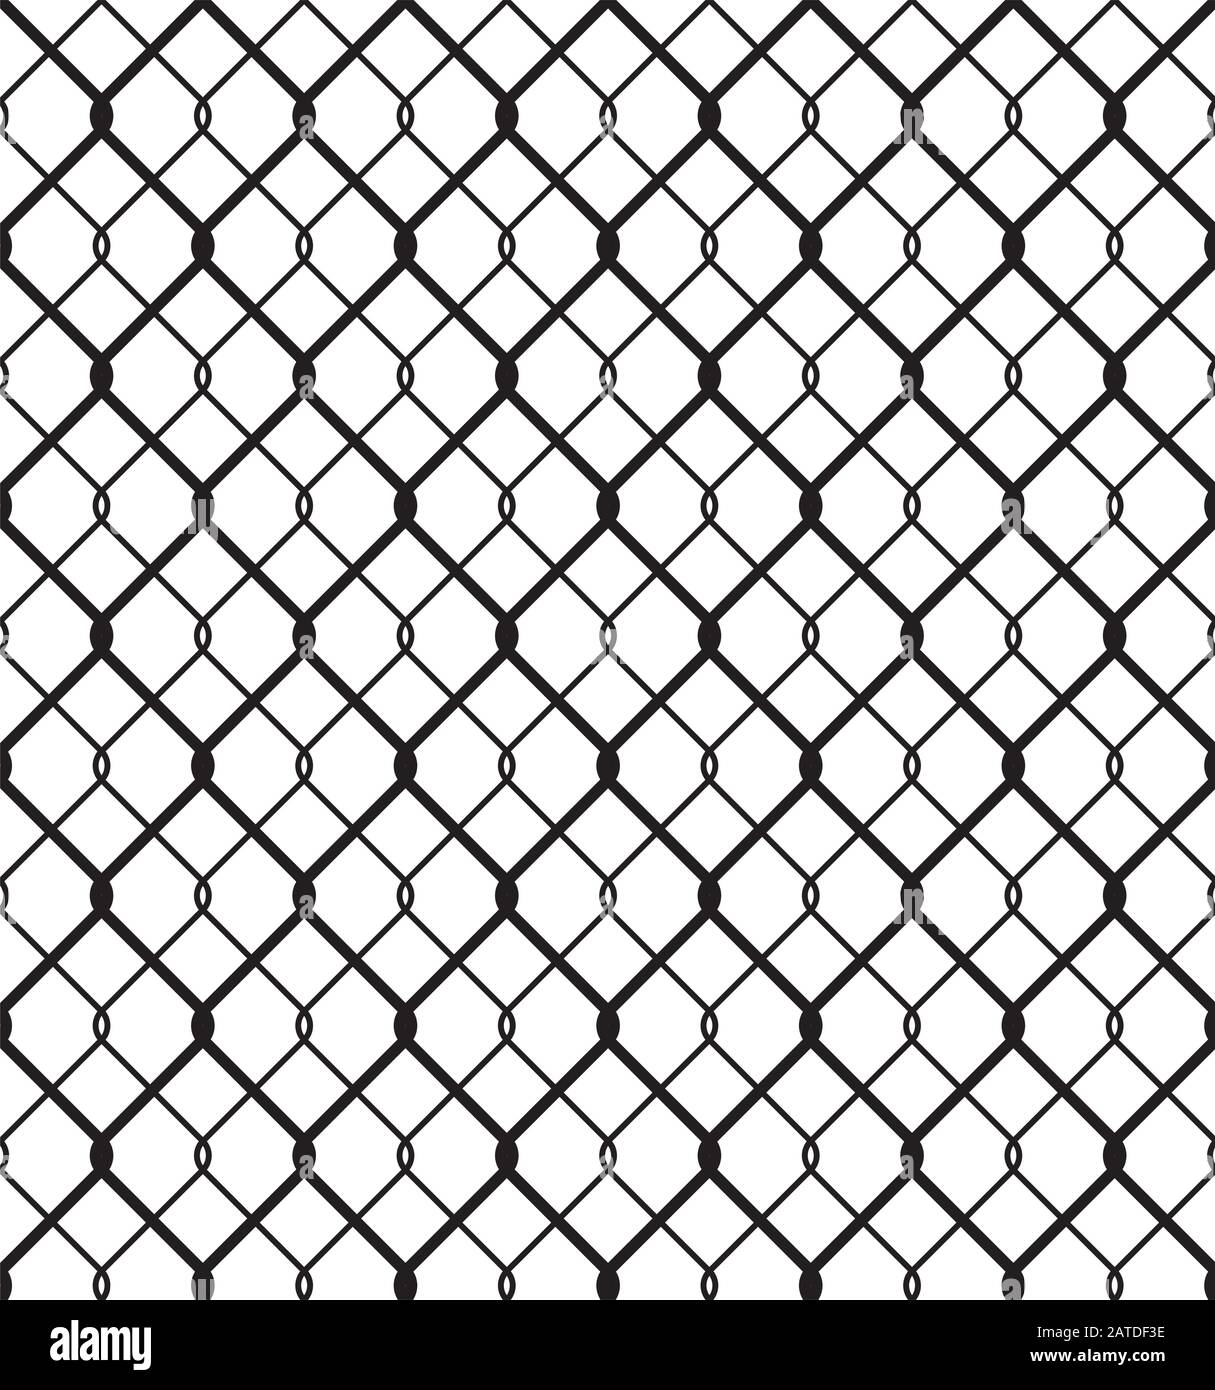 Wired metallic fence seamless texture. Steel wire mesh isolated on white background. Vector repeating pattern in EPS8 format. Stock Vector